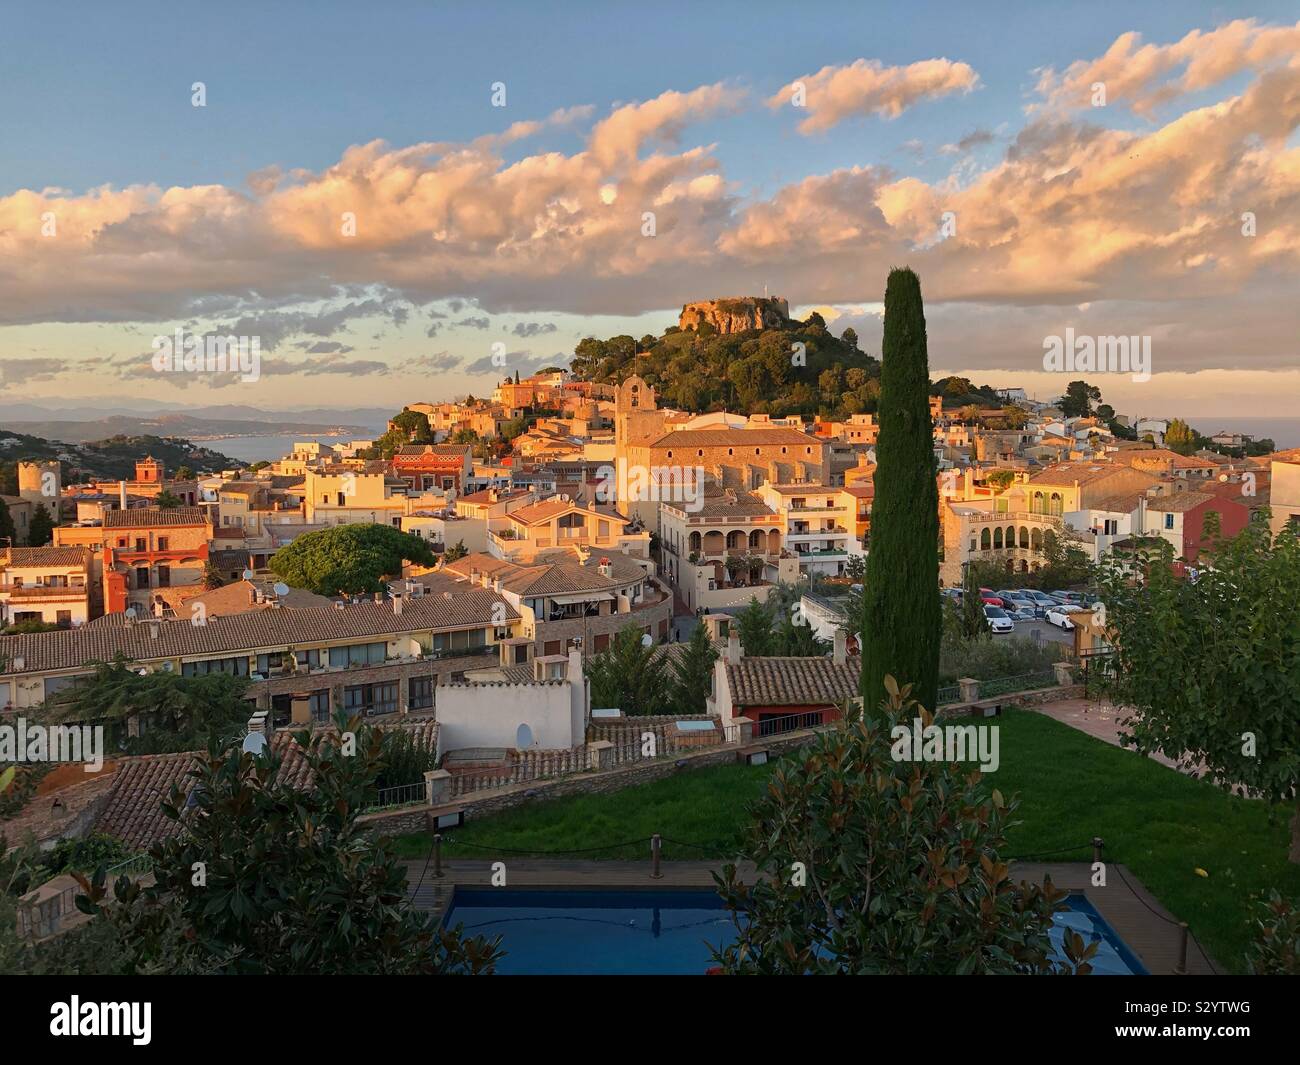 The castle ruins sitting high above the old town of Begur in Catalunya, Spain, basking in late afternoon November sunlight. Stock Photo